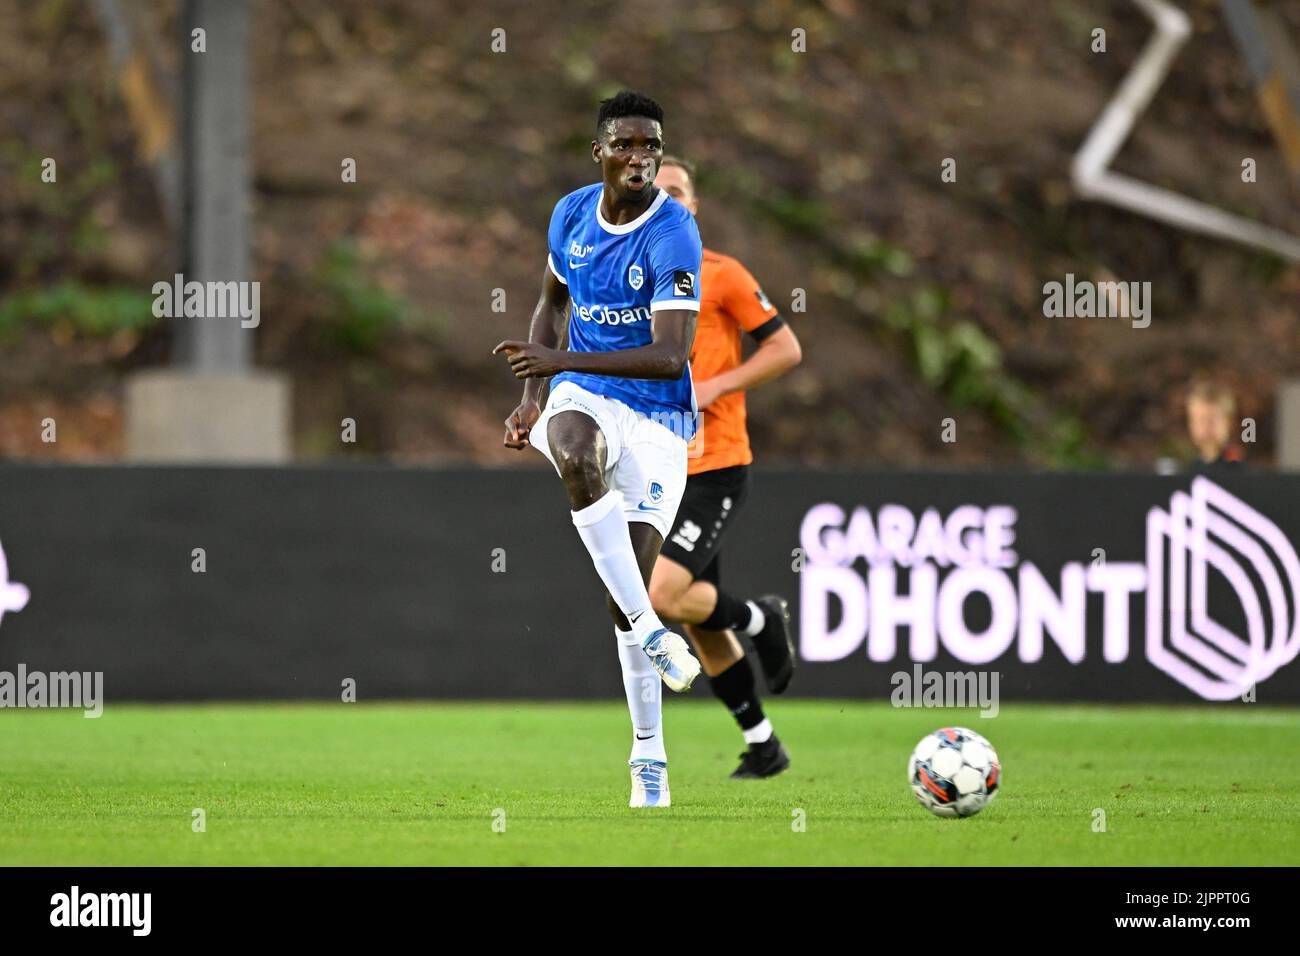 Jong Genk's Ibrahima Sory Bangoura pictured in action during a soccer match between KMSK Deinze and Jong Genk, Friday 19 August 2022 in Deinze, on day 2 of the 2022-2023 'Challenger Pro League' 1B second division of the Belgian championship. BELGA PHOTO FILIP LANSZWEERT Stock Photo